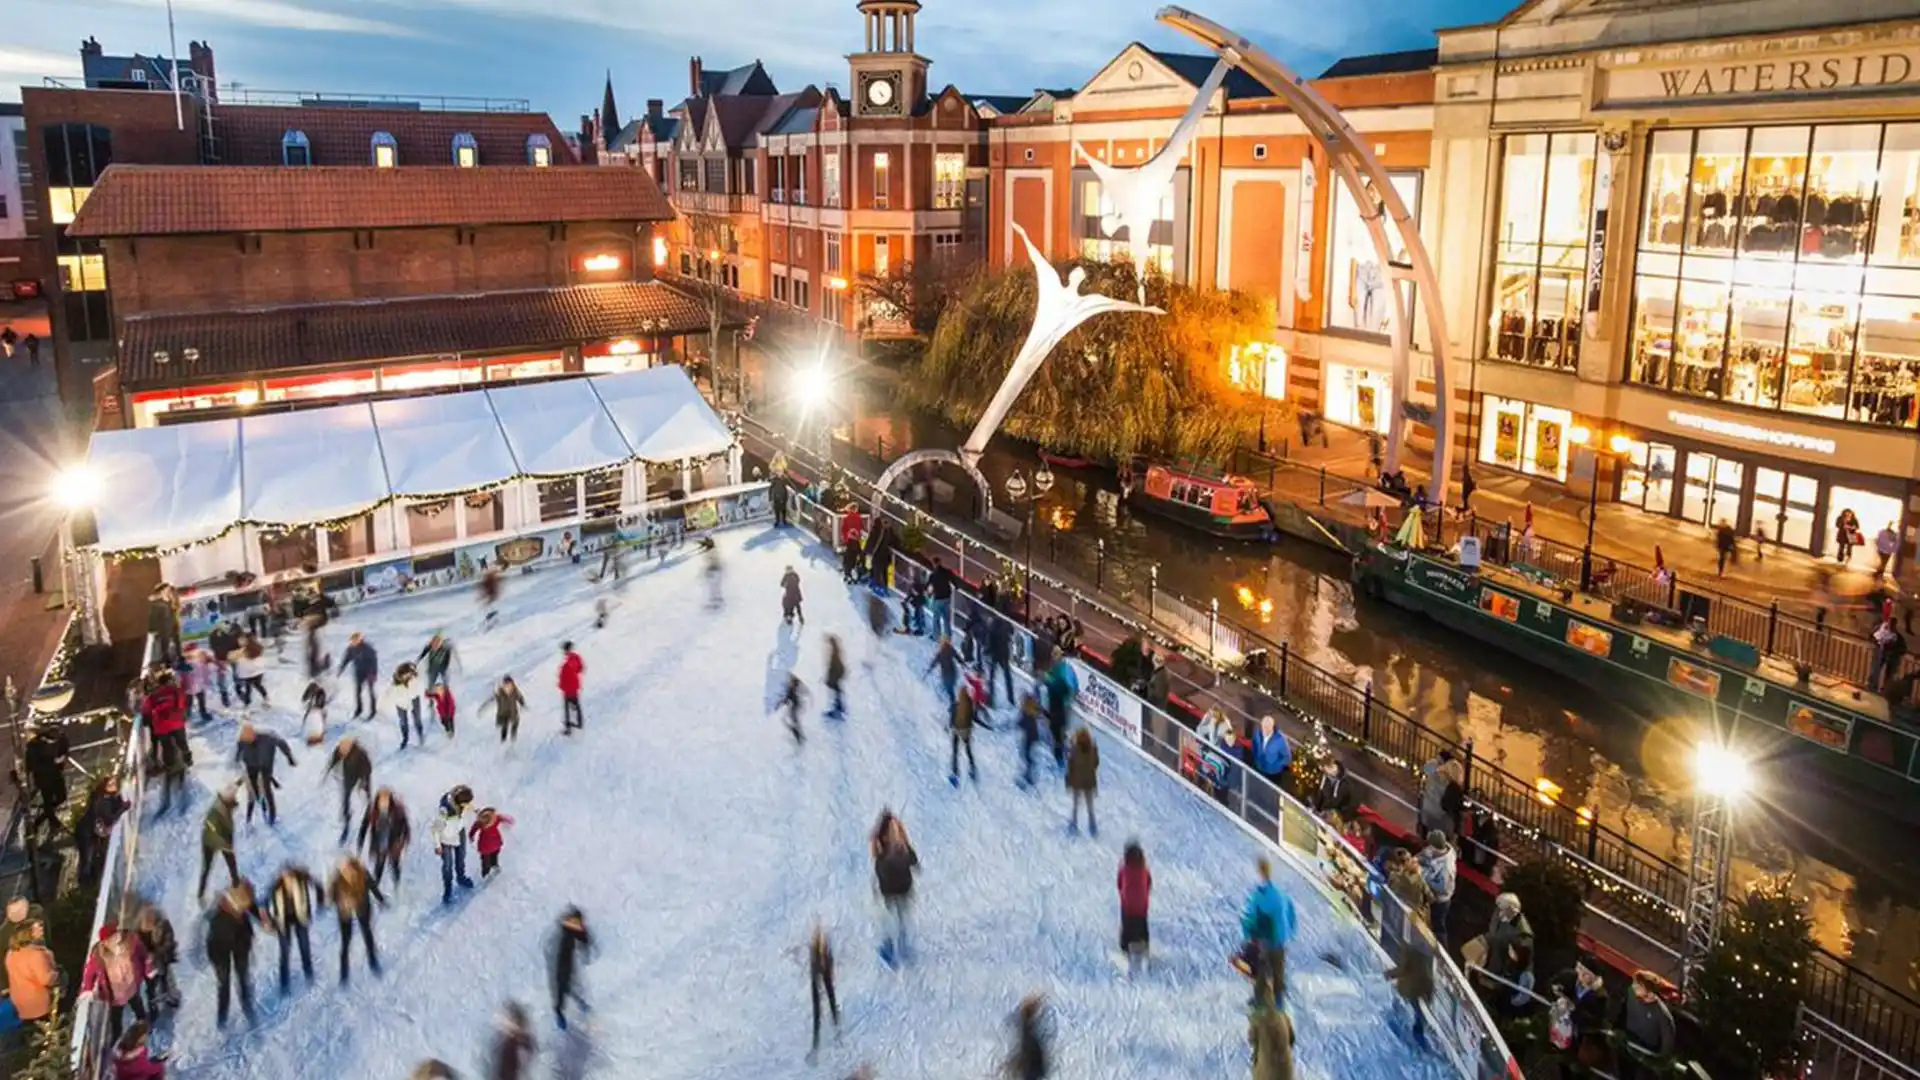 Lincoln Ice Rink